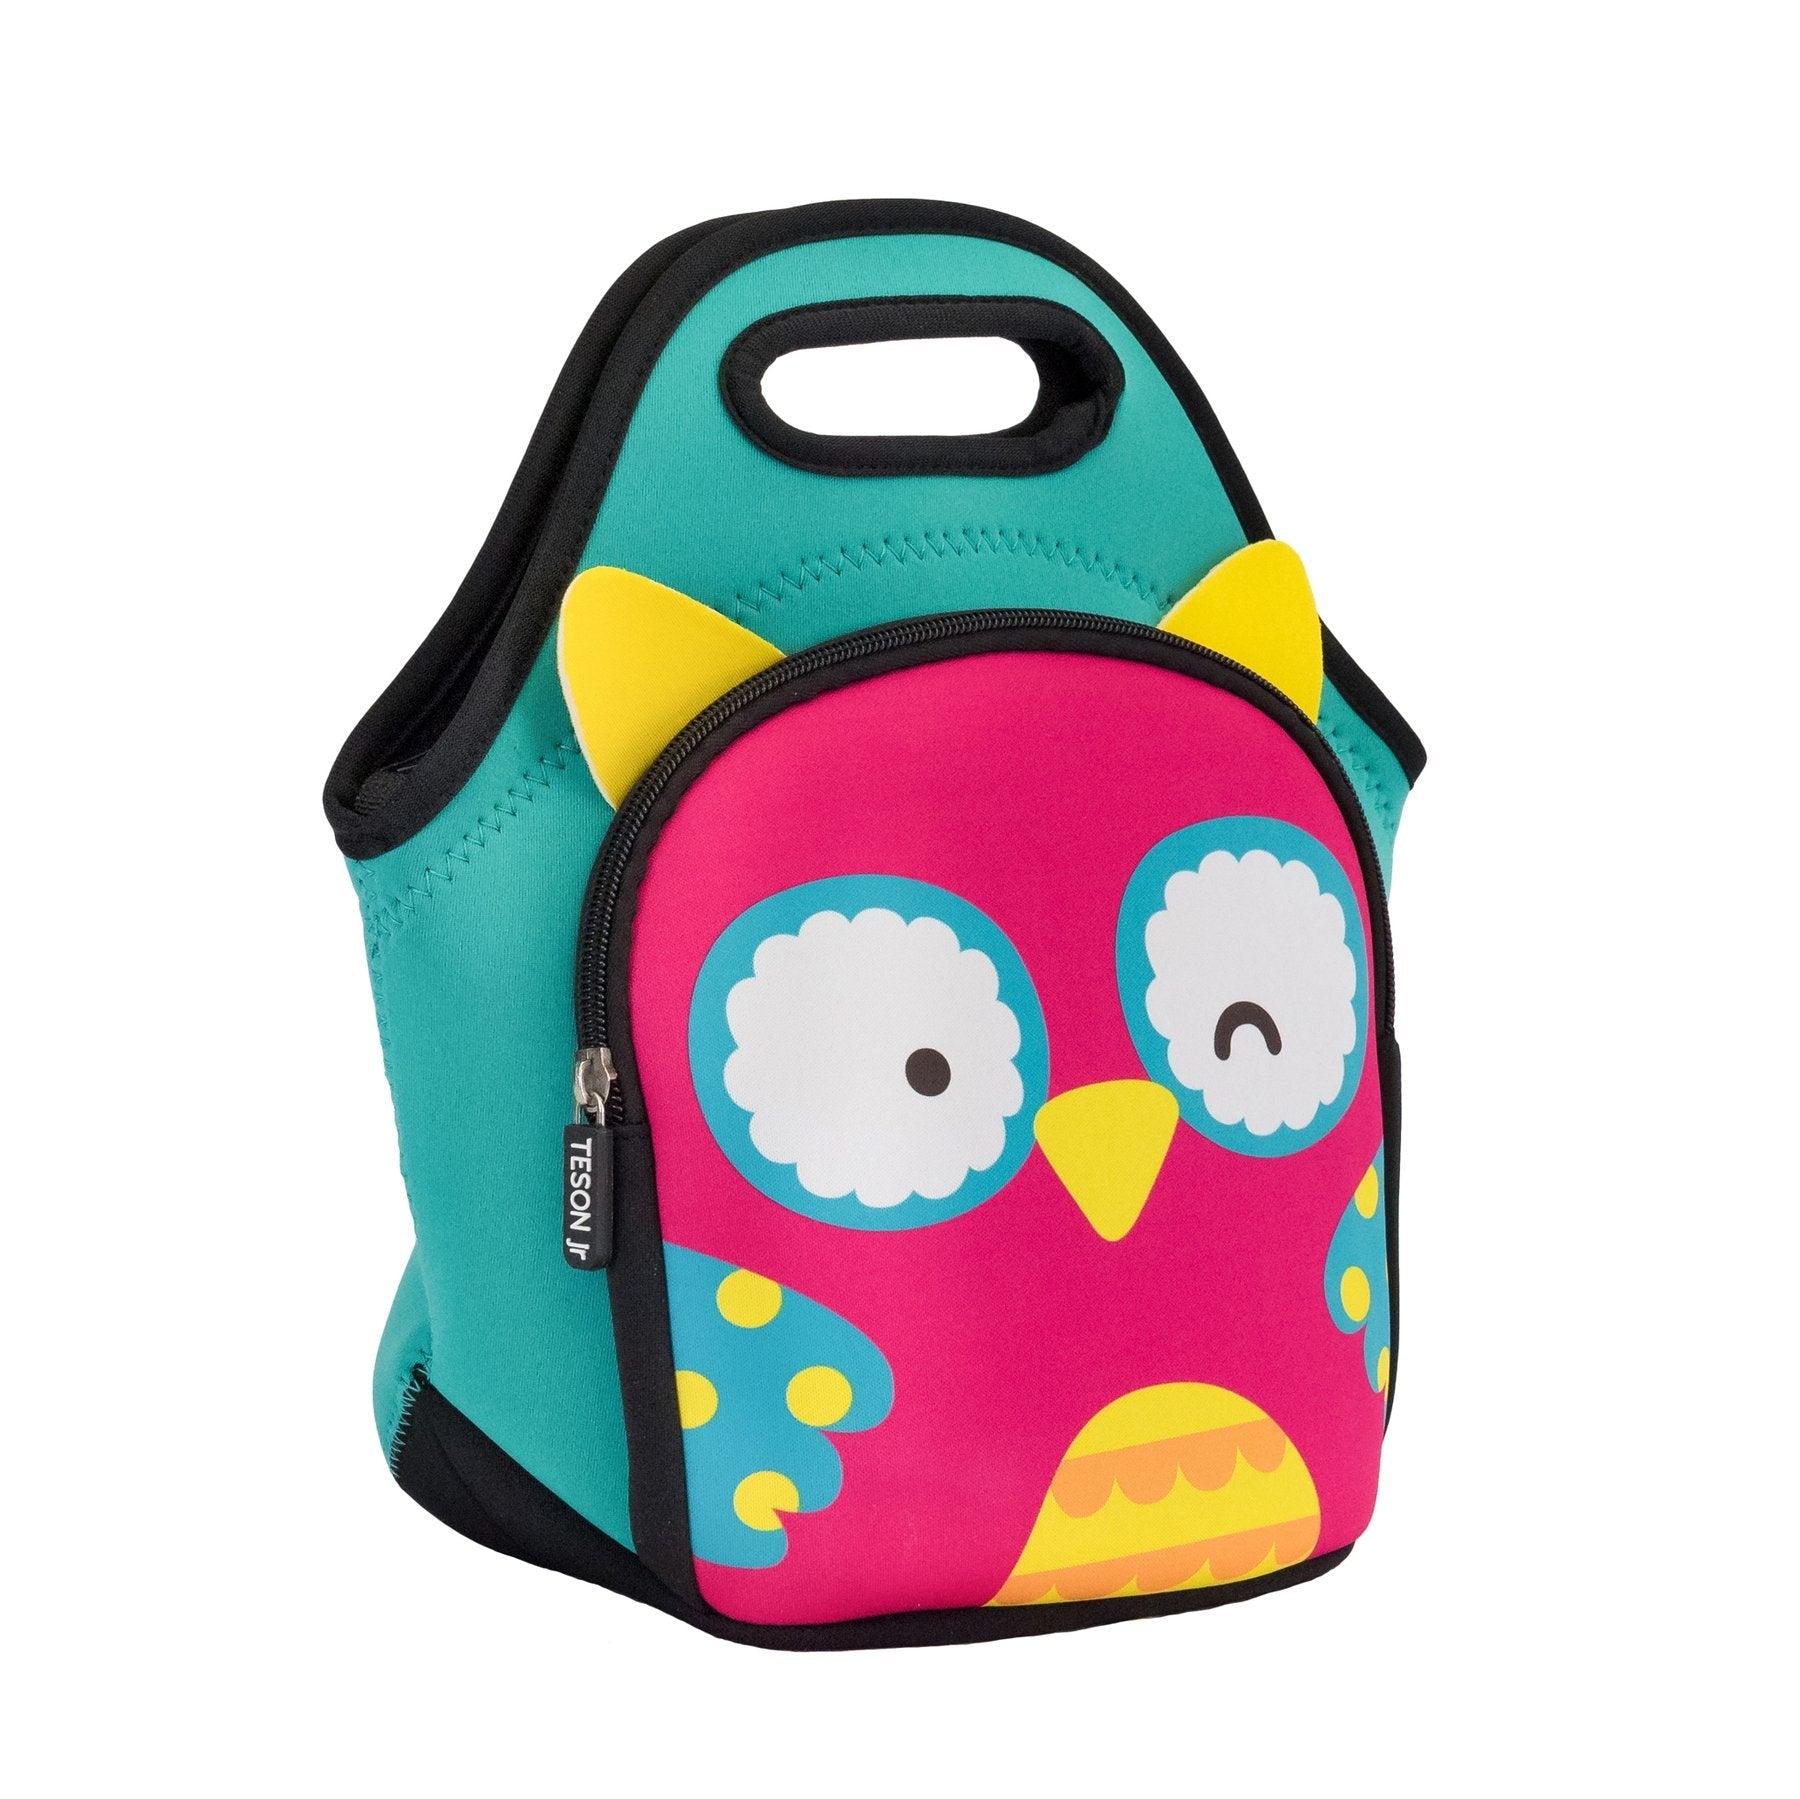 Childrens insulated owl lunch bag/box. Suitable for daycare, preschool, prep, school. Found at Tantrika Australia.